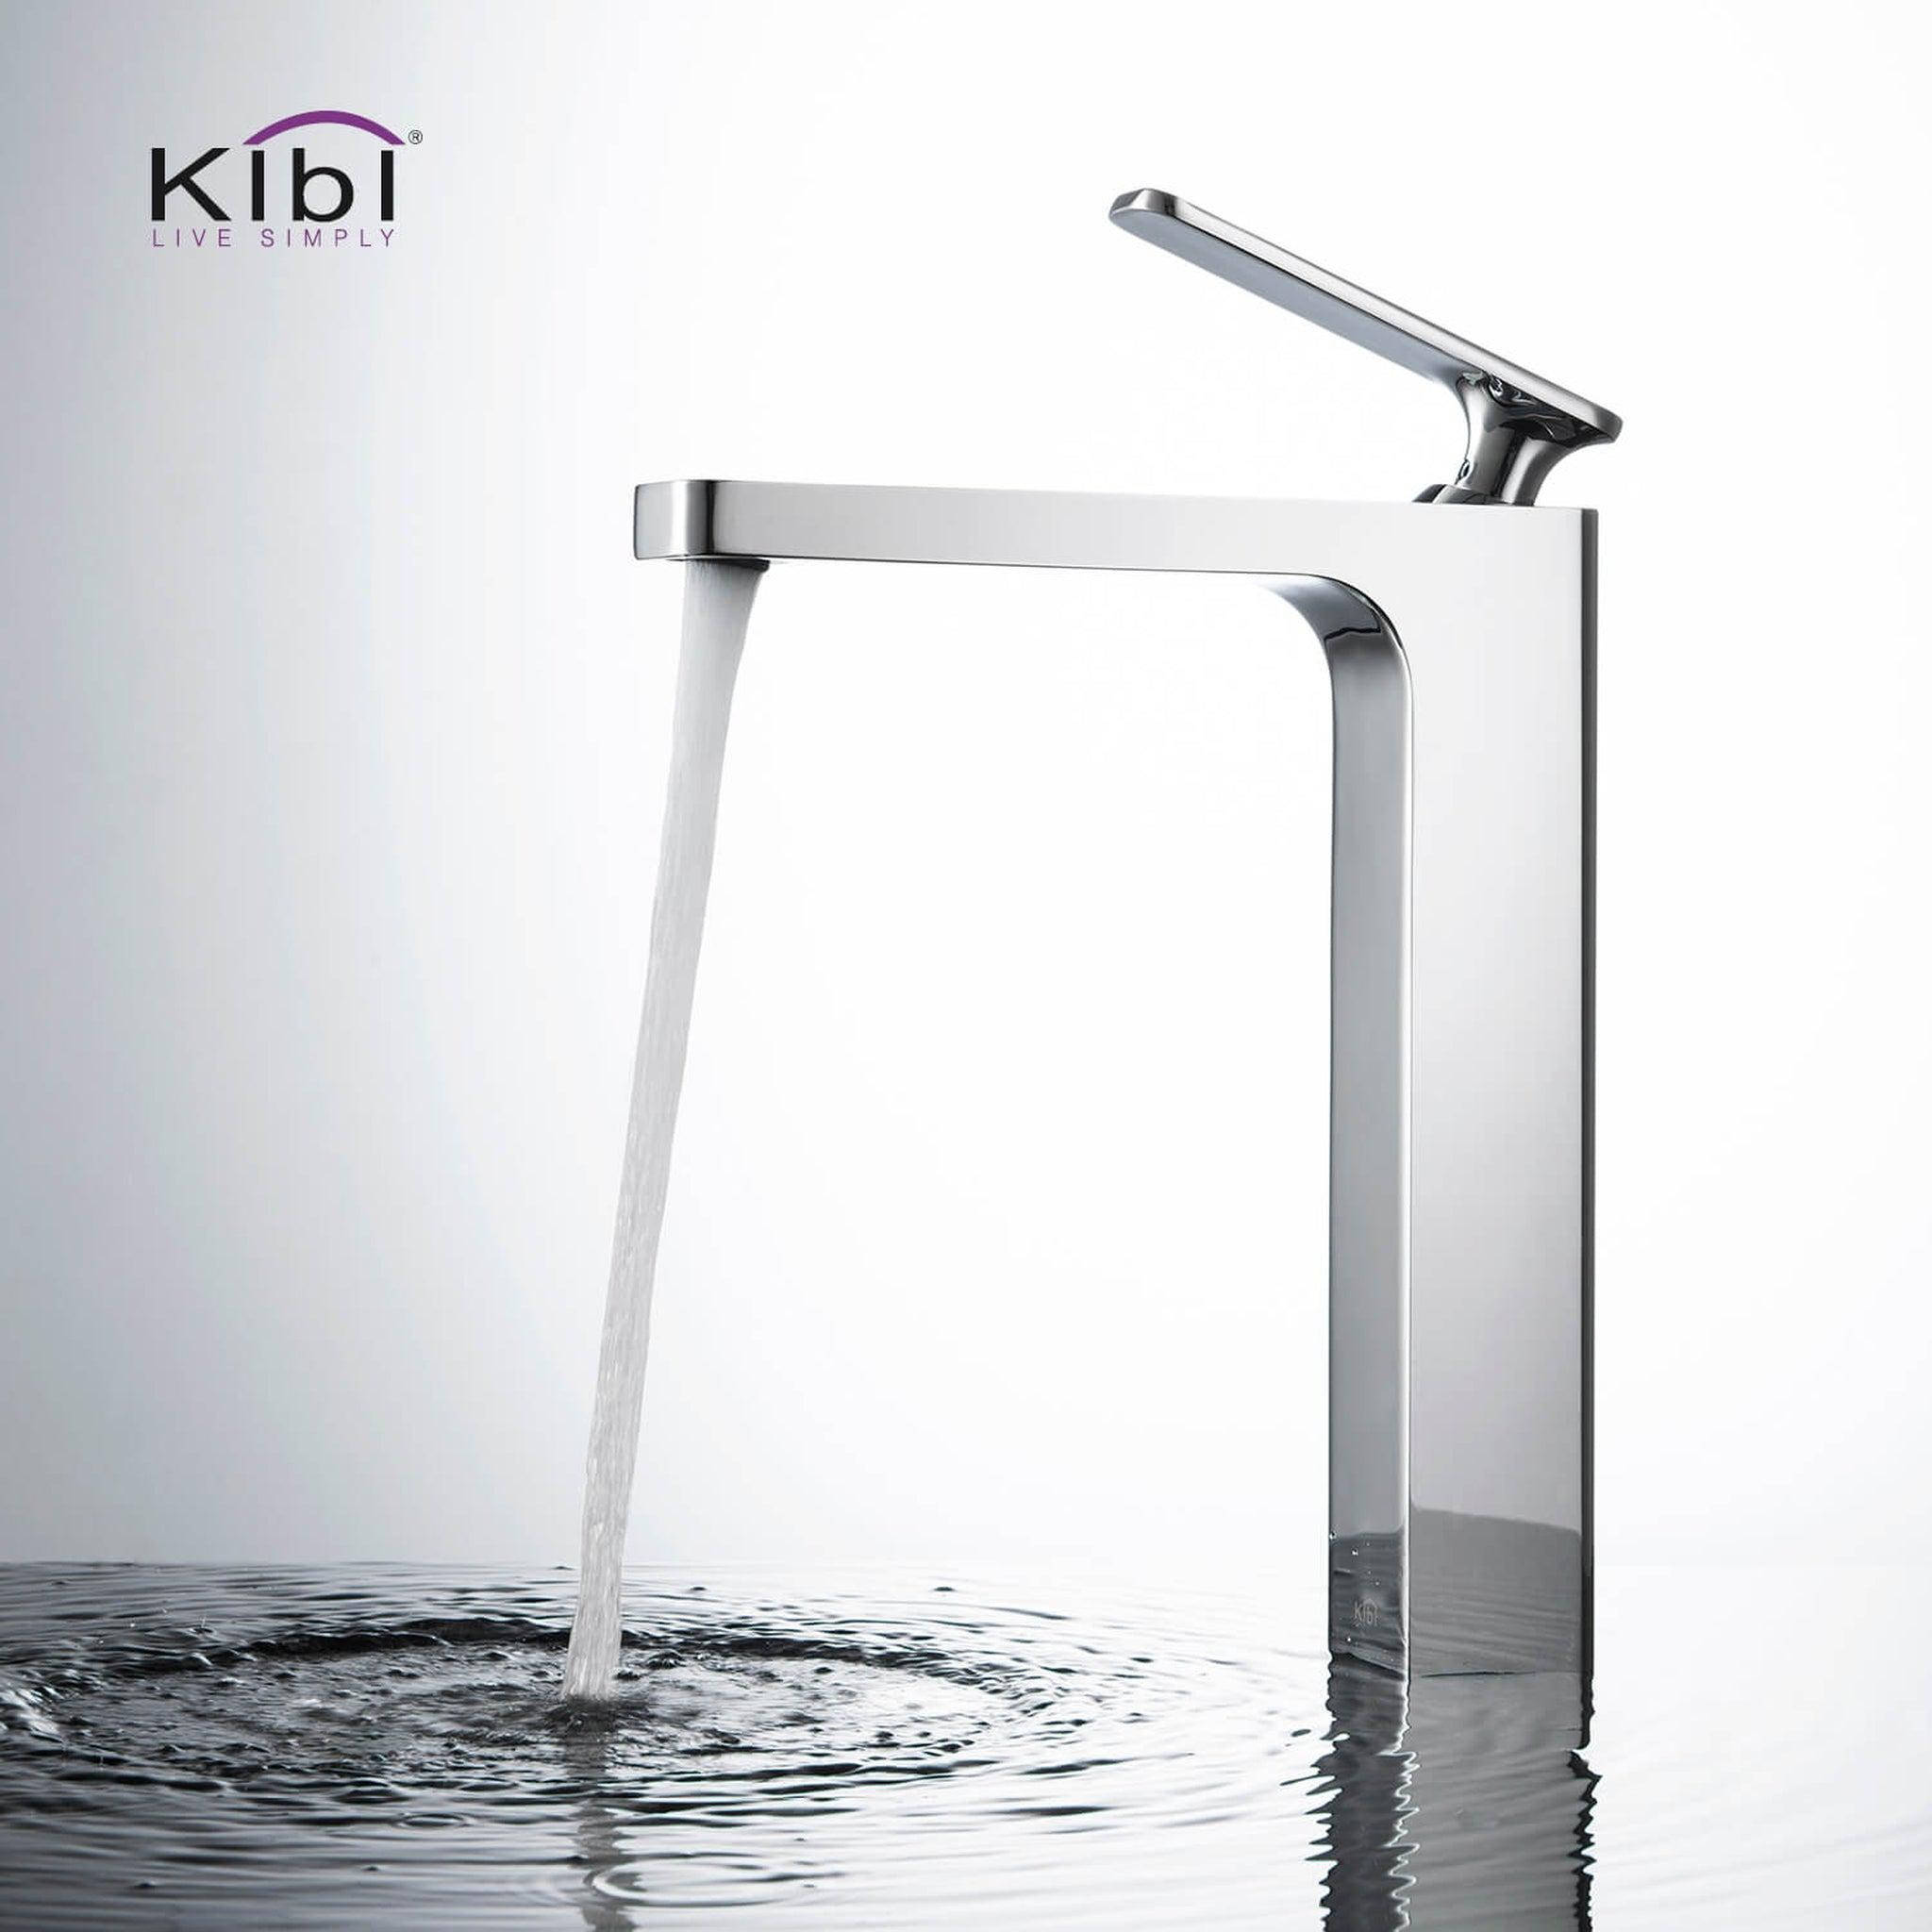 KIBI, KIBI Infinity Single Handle Chrome Solid Brass Bathroom Vanity Vessel Sink Faucet With Pop-Up Drain Stopper Small Cover Without Overflow